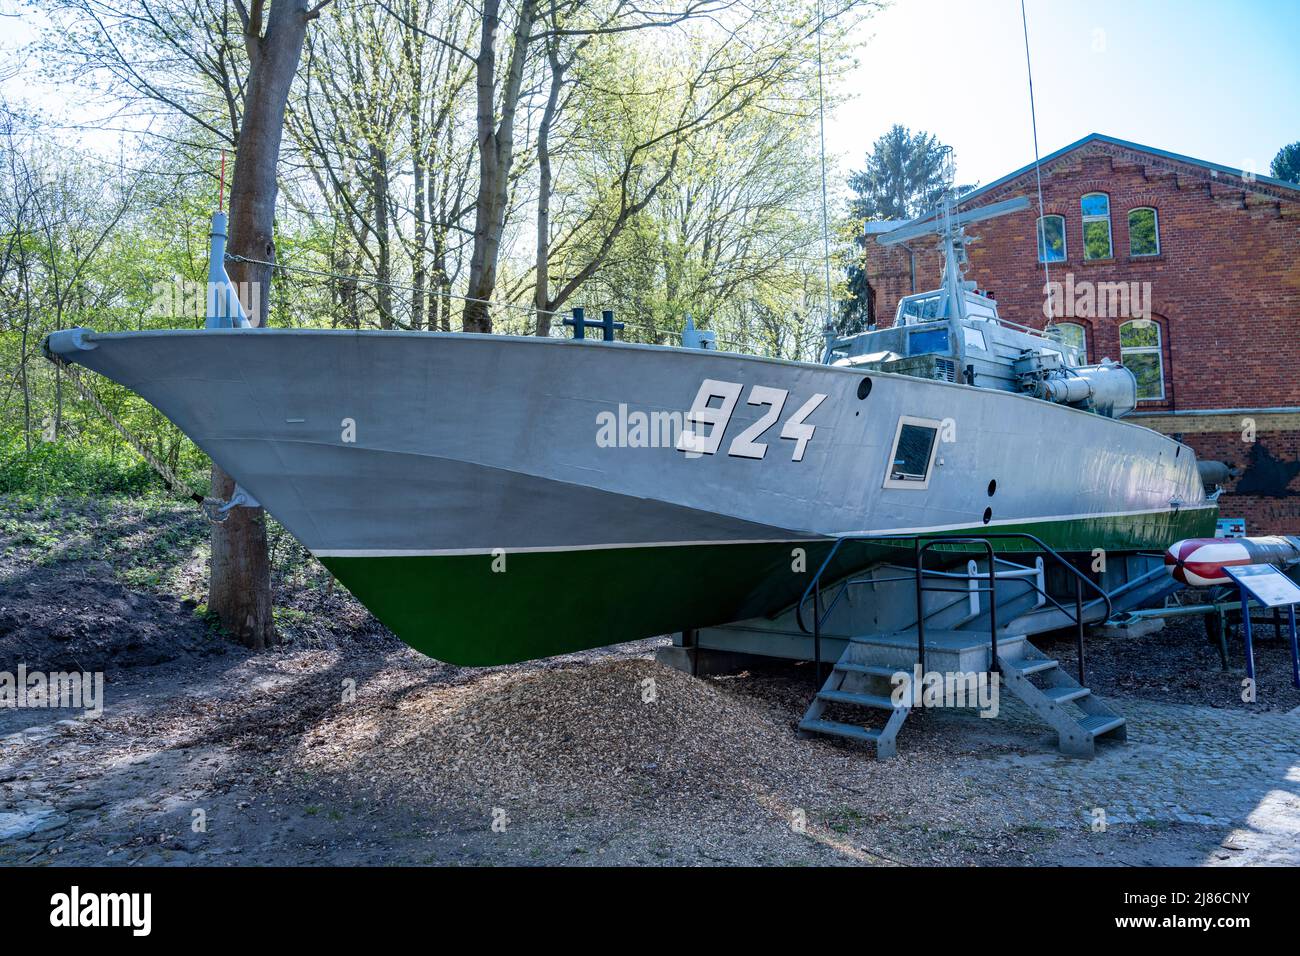 25 April 2022, Mecklenburg-Western Pomerania, Stralsund: On the outdoor grounds of the Dänholm Naval Museum stands torpedo speedboat 'Libelle' - Project 131. The ship was used by the NVA in the Baltic Sea during GDR times. On the island of Dänholm, between the mainland and Rügen, visitors can immerse themselves in naval history on Museum Day in a former barracks. The museum displays original objects from military seafaring such as uniforms and weapons, as well as photos, films and documents. Attractions also include a naval helicopter and a torpedo speedboat. Photo: Stefan Sauer/dpa Stock Photo